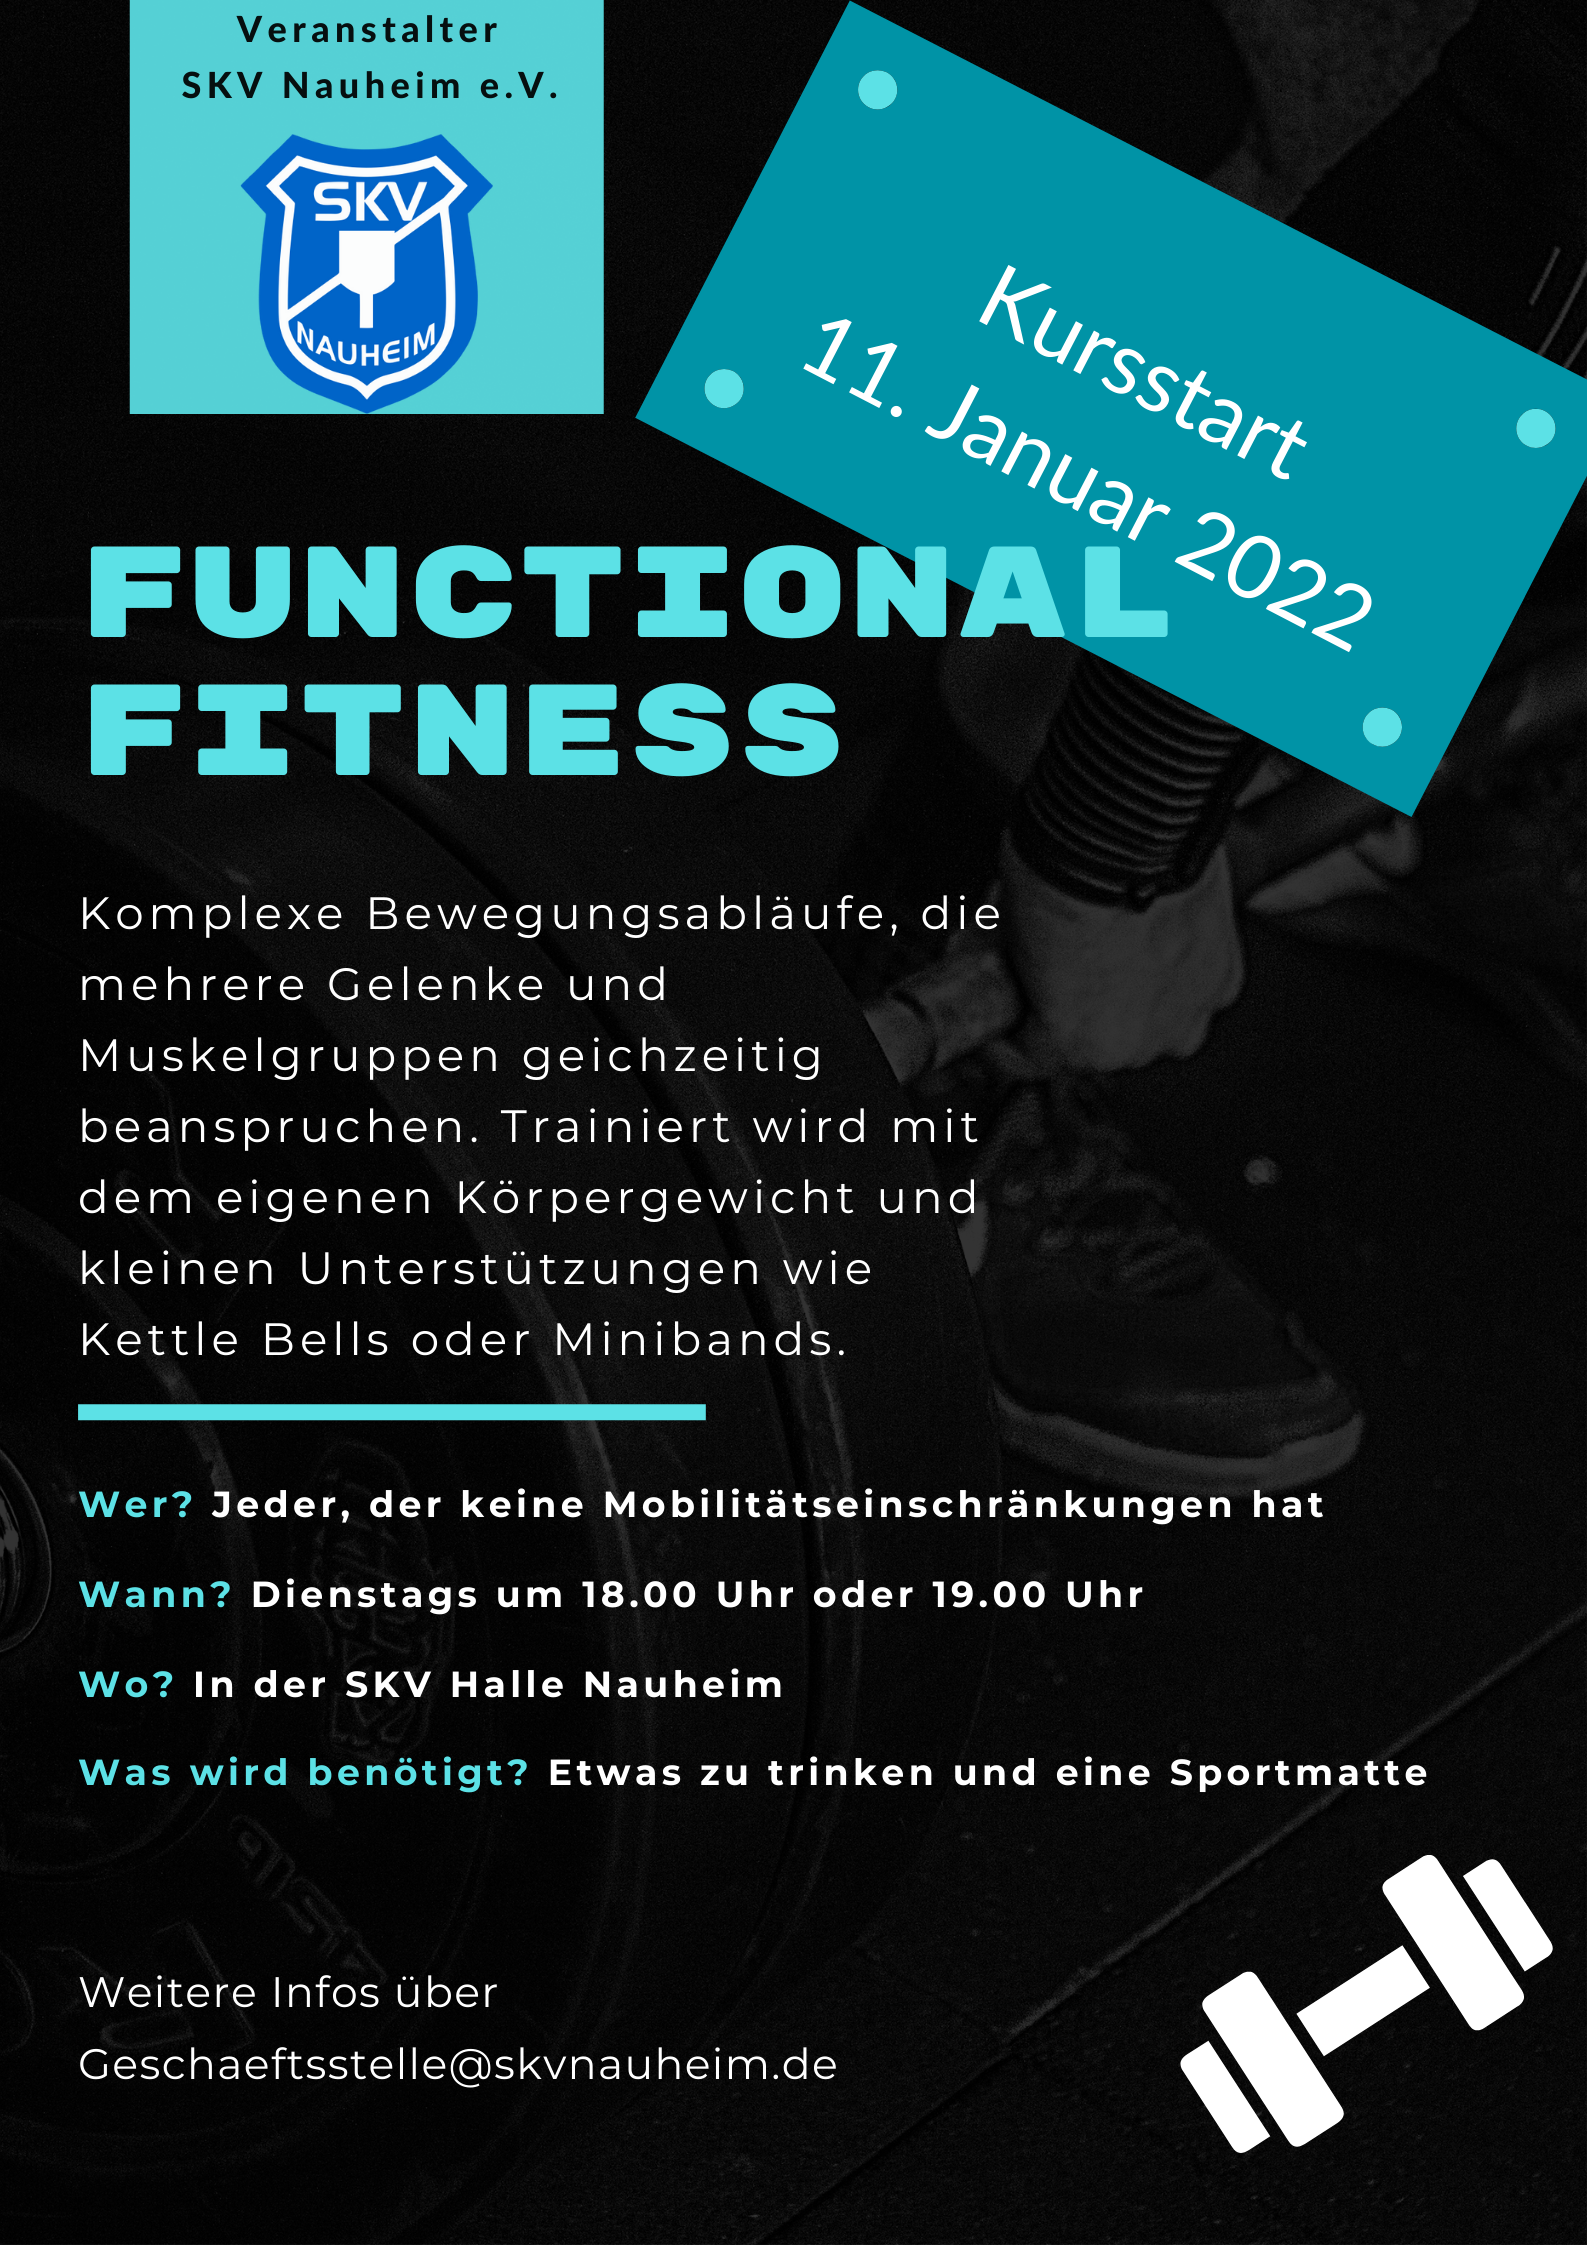 Functional Fitness 2022